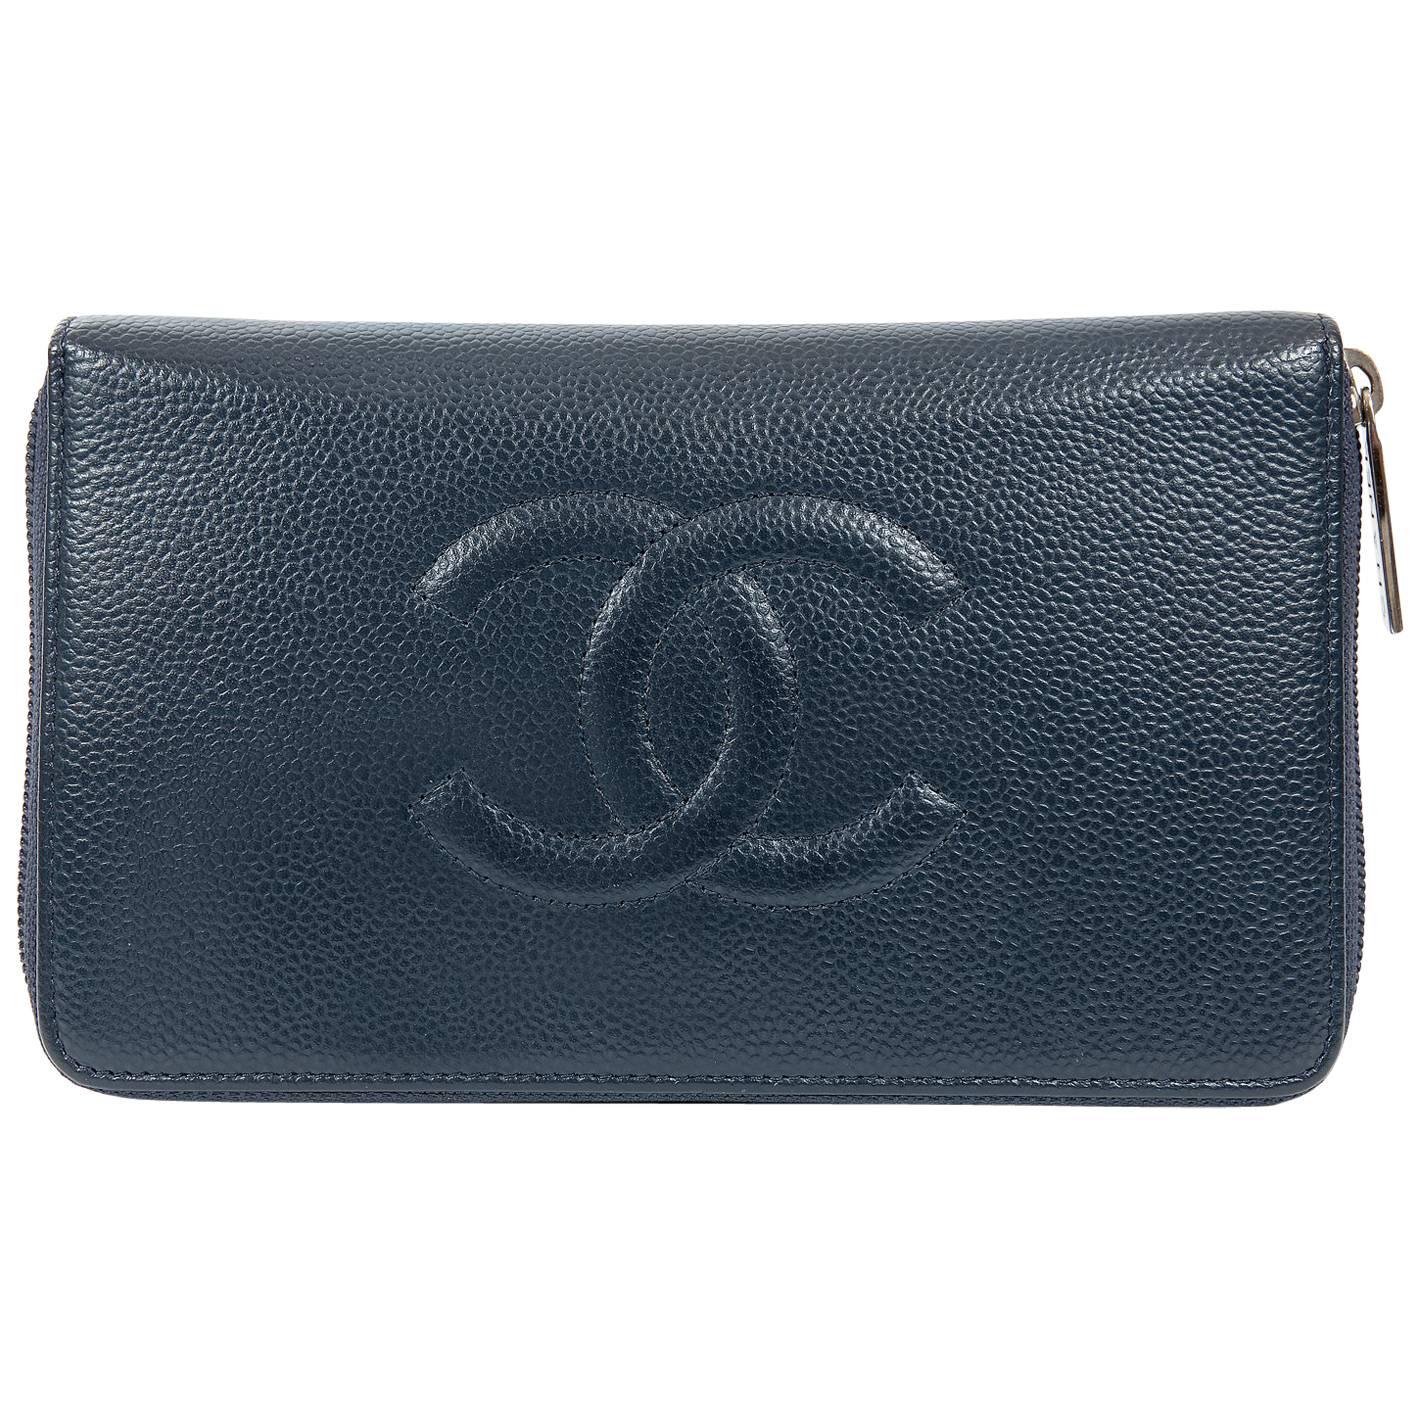 Chanel Navy Caviar Leather XL Zip Wallet For Sale